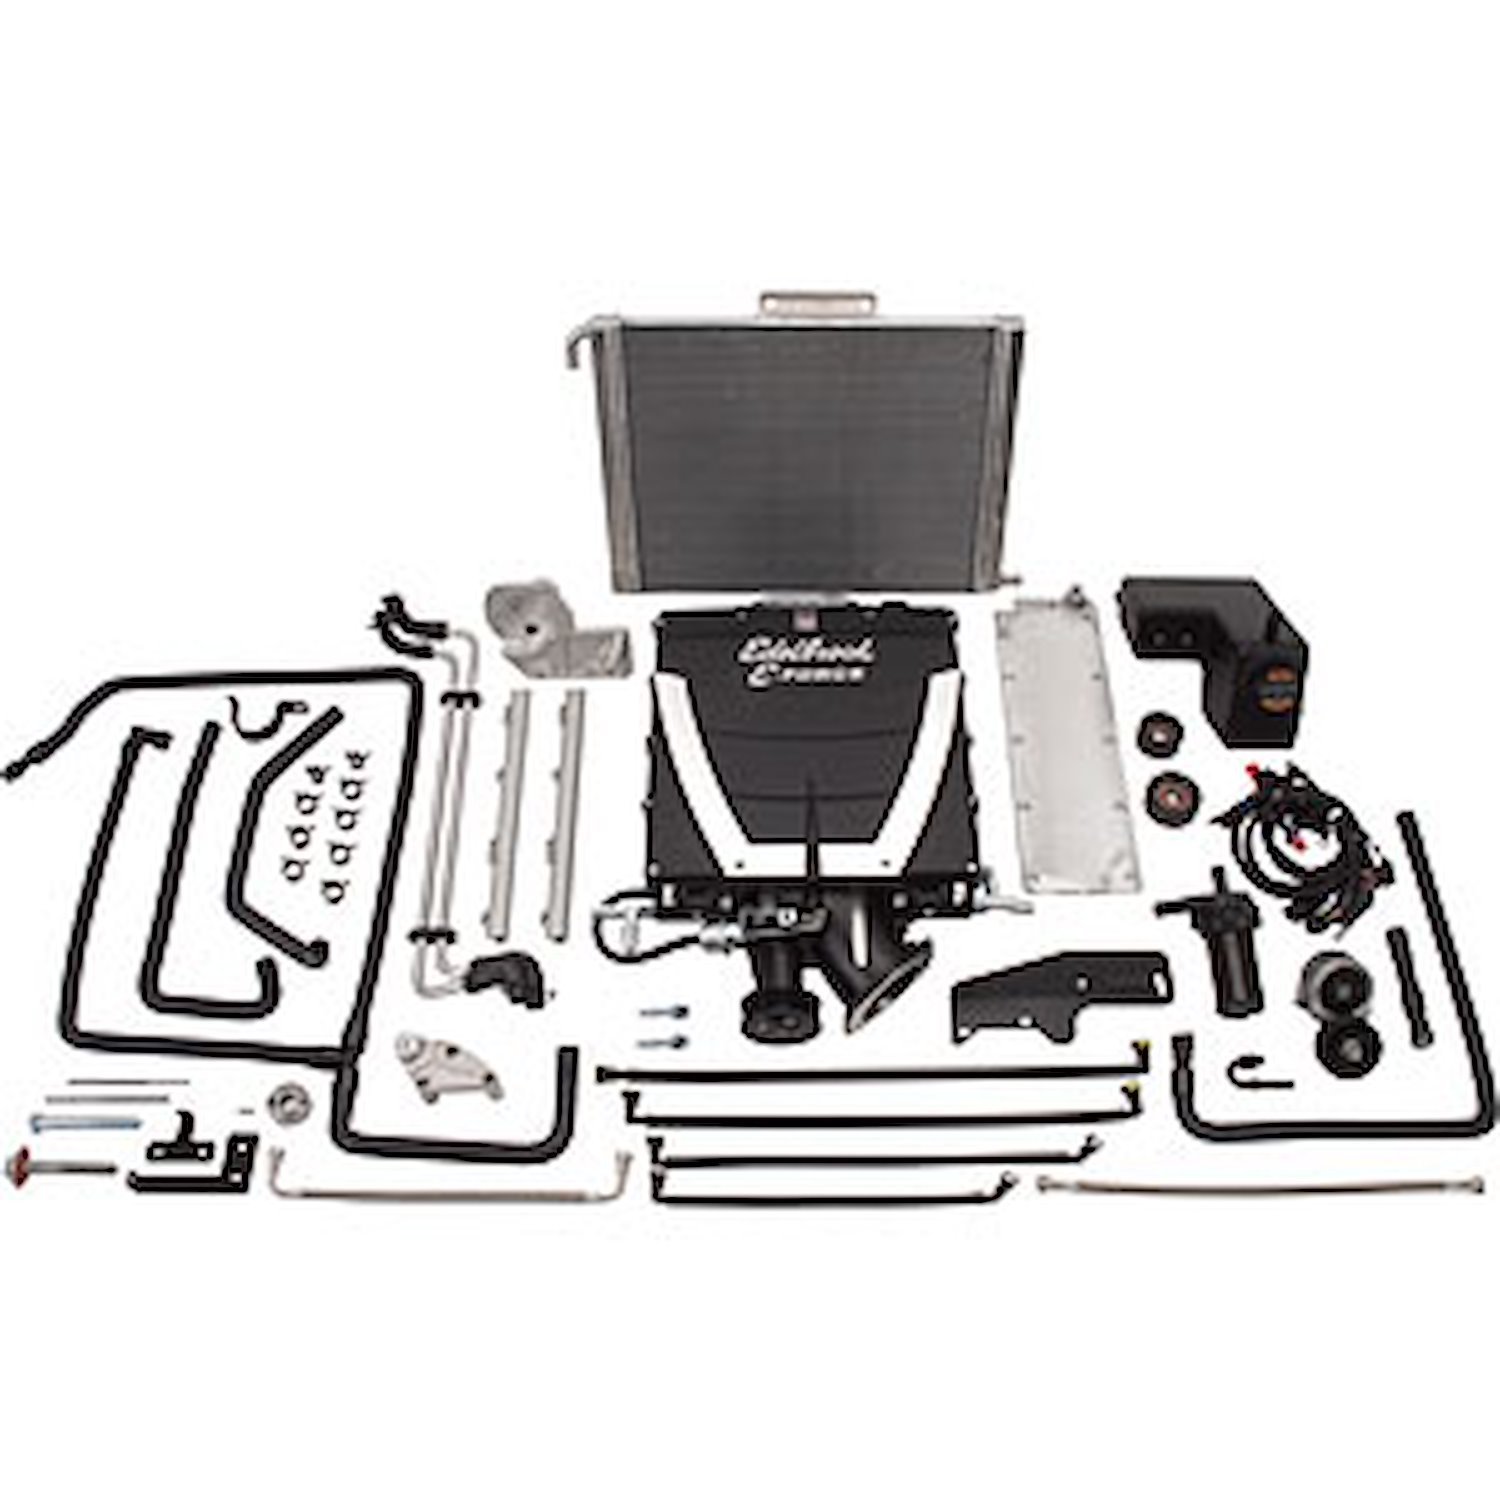 E-Force Stage 3 Pro-Tuner Supercharger Kit 2010-2015 Camaro